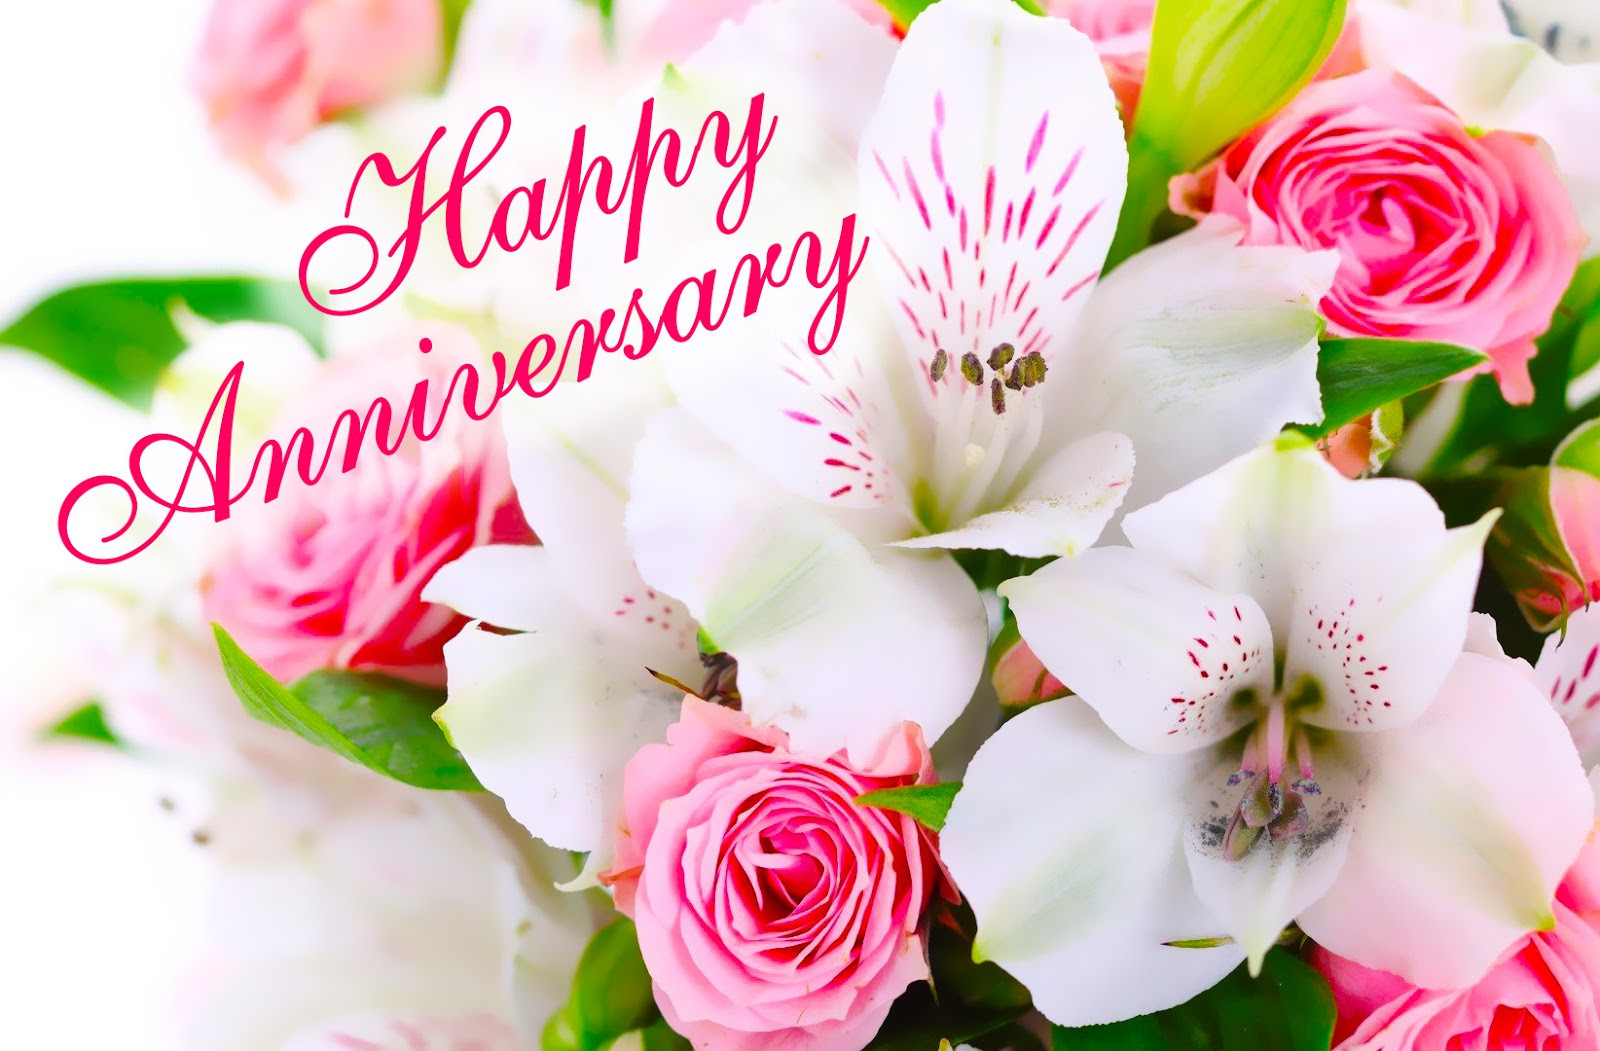 Wedding Anniversary Wishing Quotes
 Happy Anniversary Wishes Messages With Quotes And Sayings